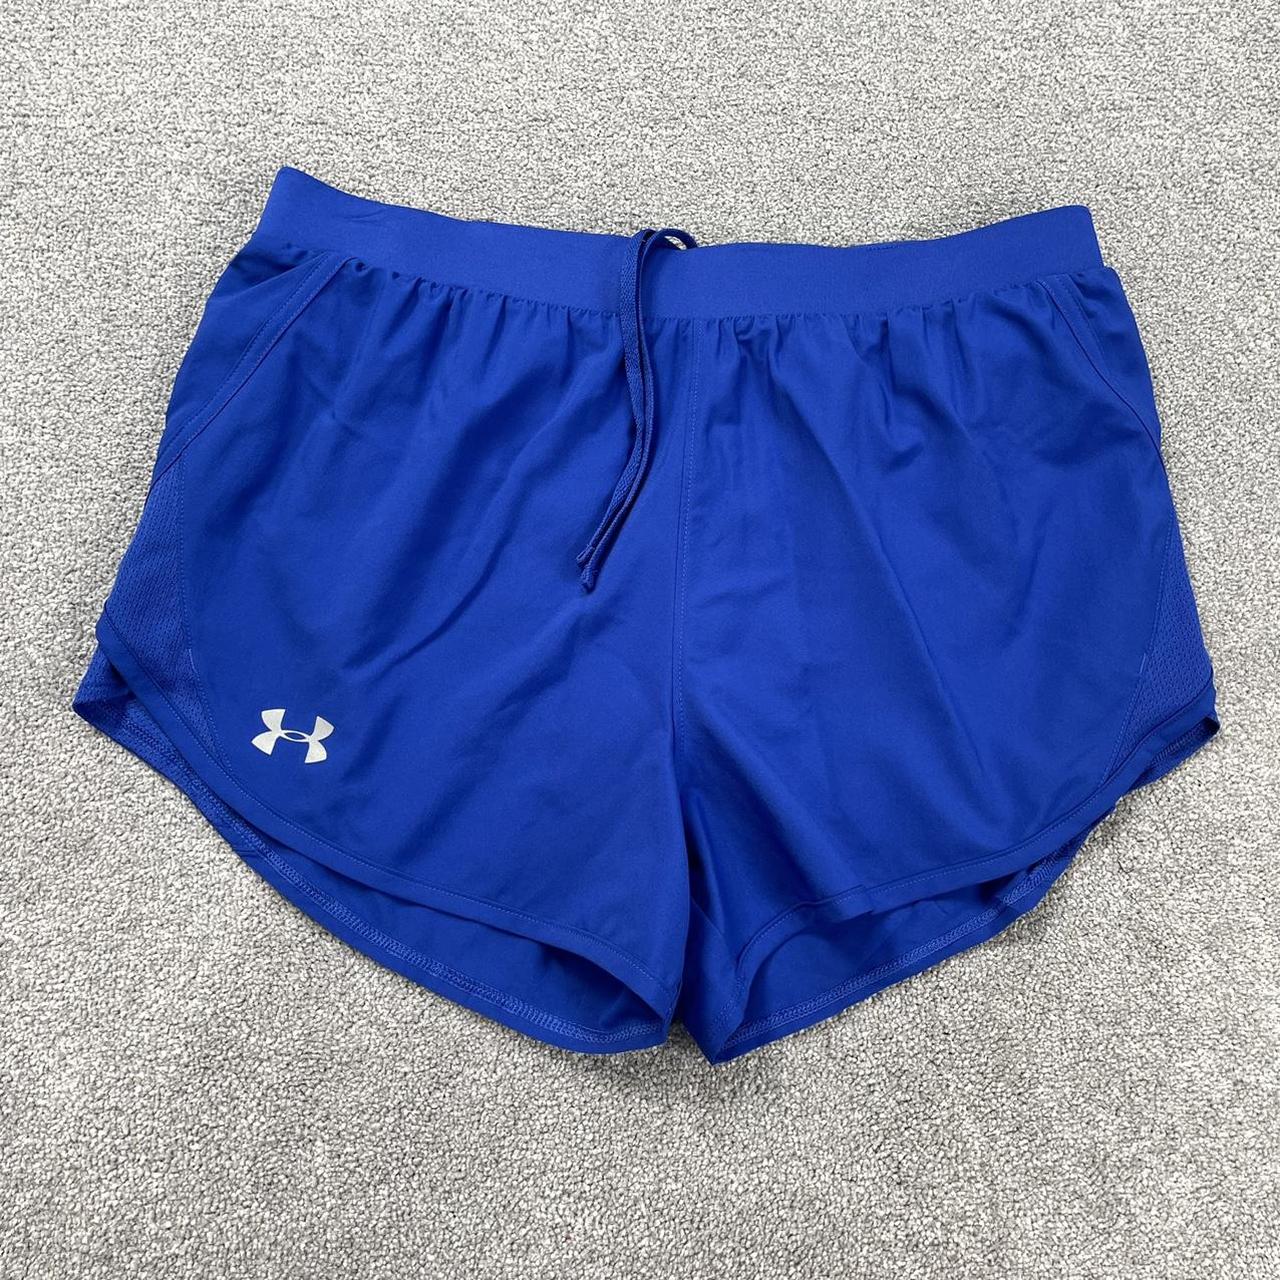 BLUE UNDER ARMOUR SHORTS Sport Shorts with retro... - Depop